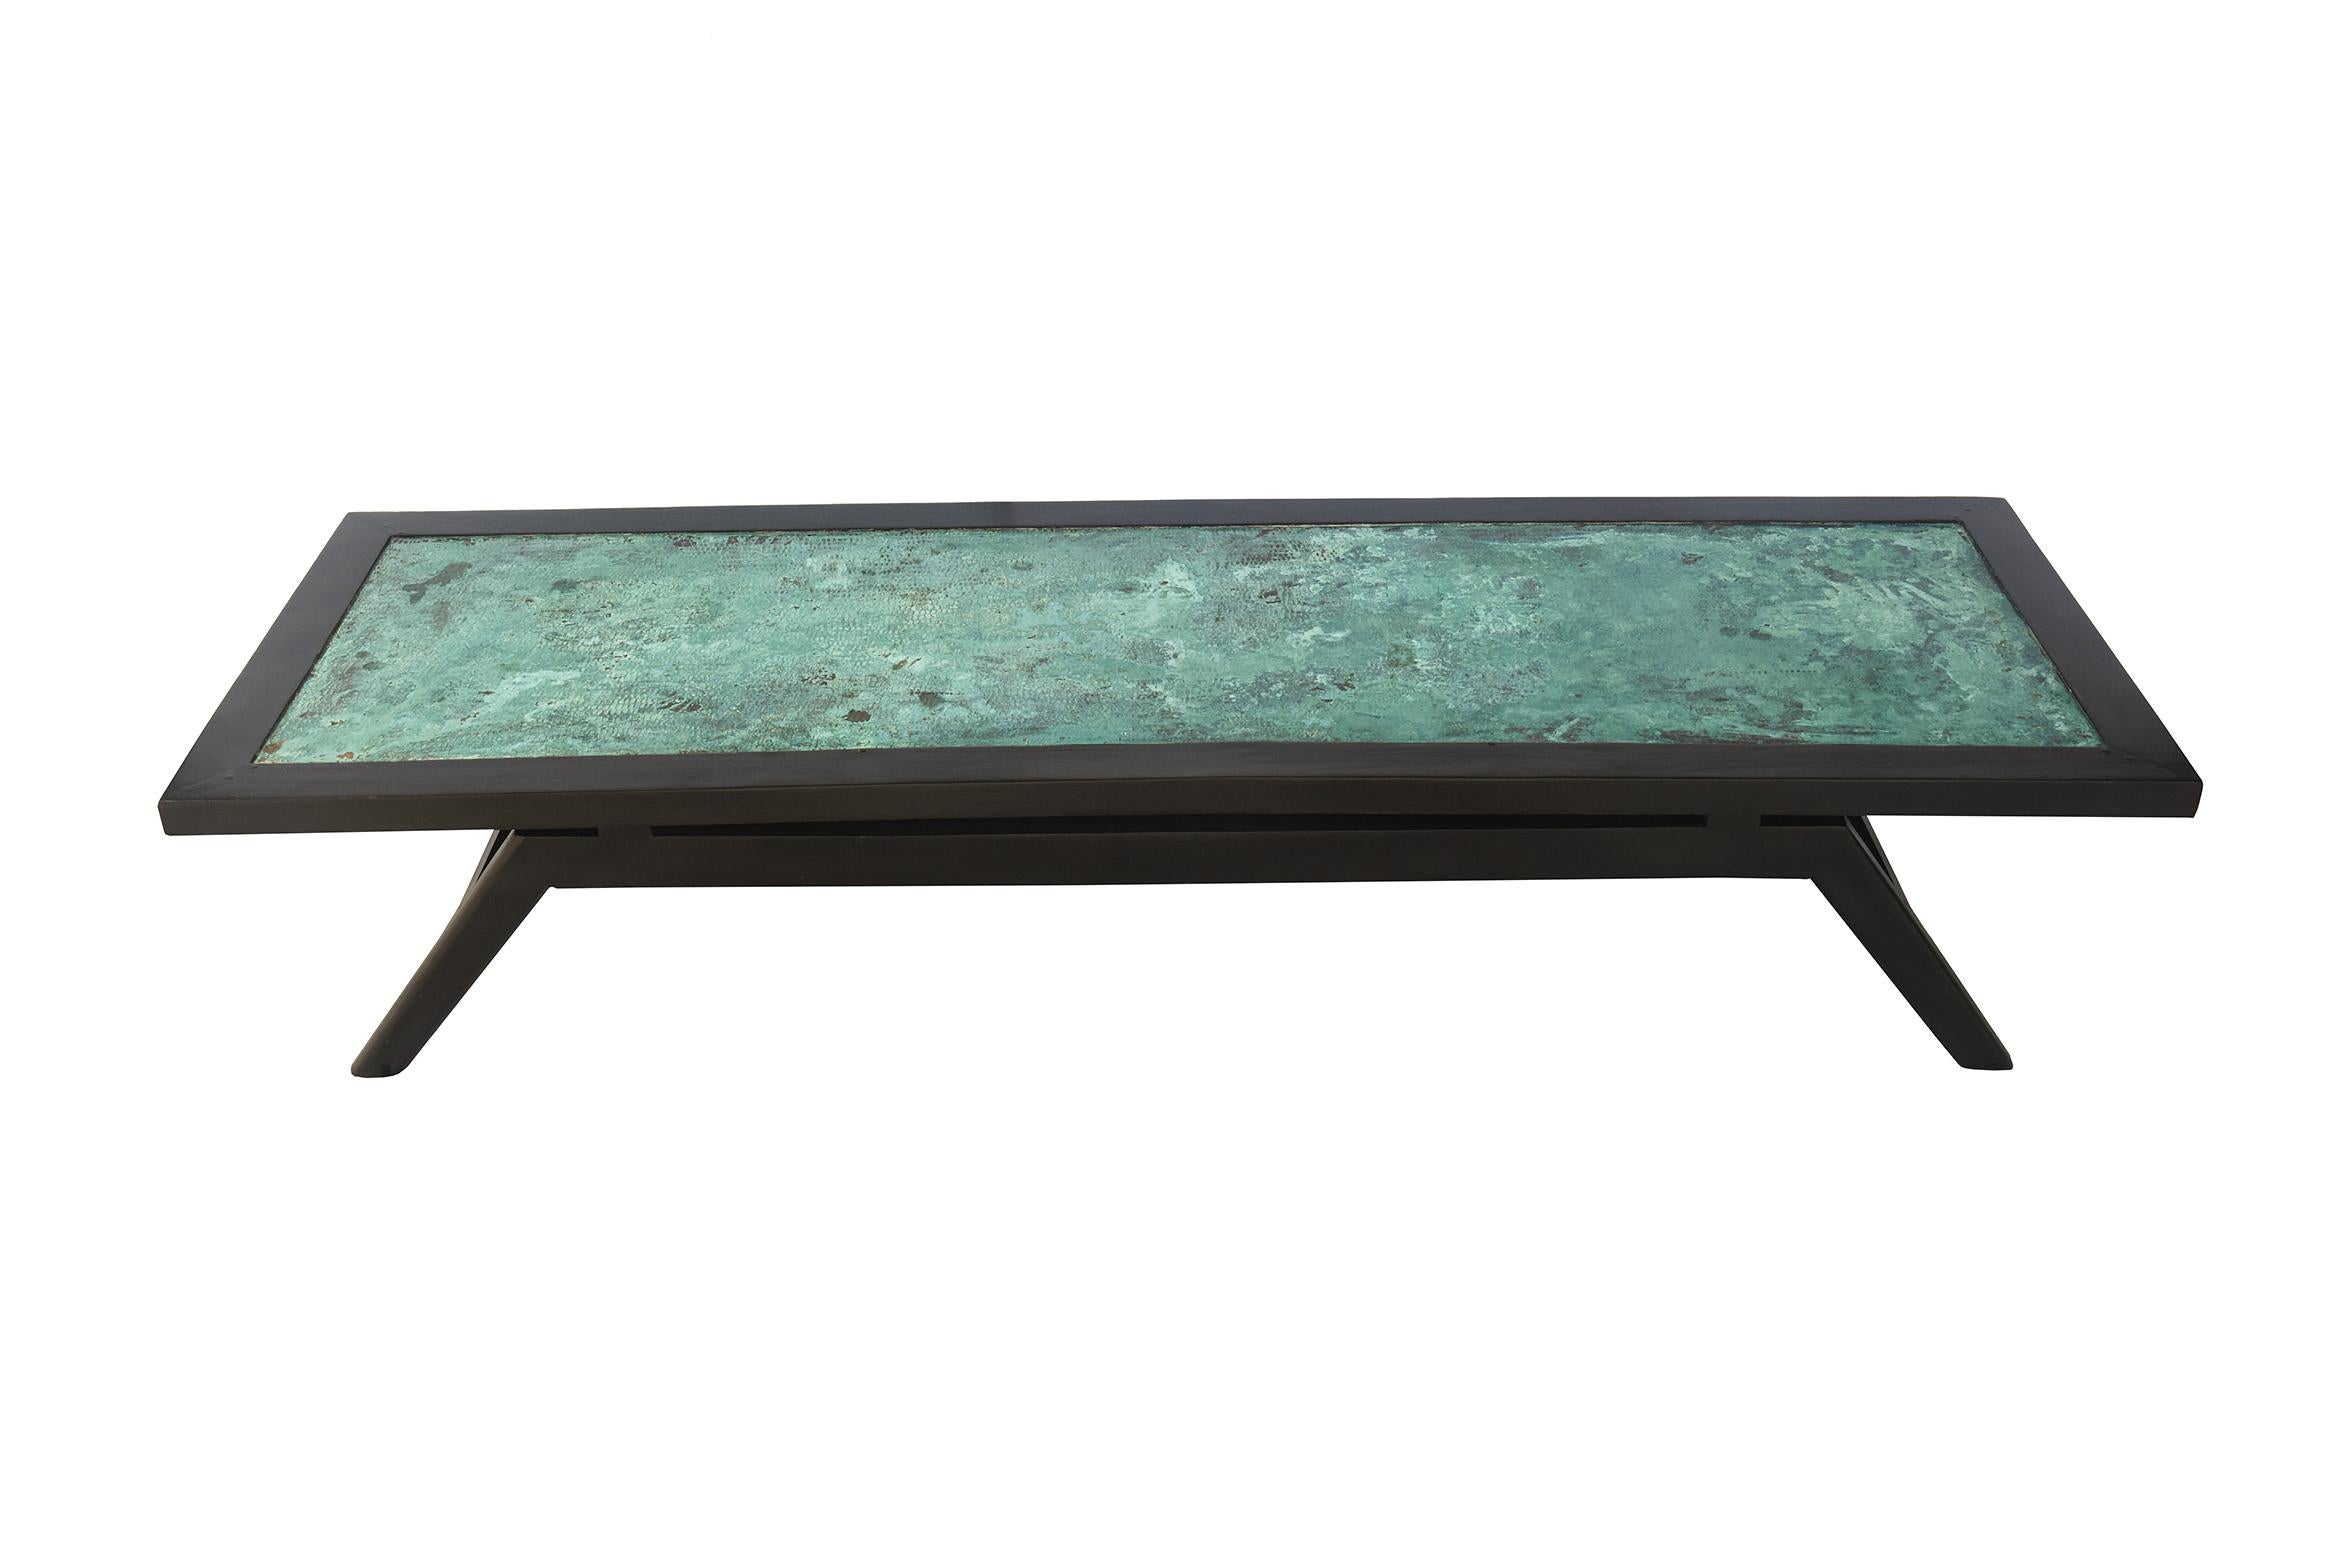 This vintage elongated rectangular cocktail table is black stained oak with an artistic top of patinated hammered copper that results in mottled turquoise and green colors with tan brown peaking through. It is both modern and has rustic qualities